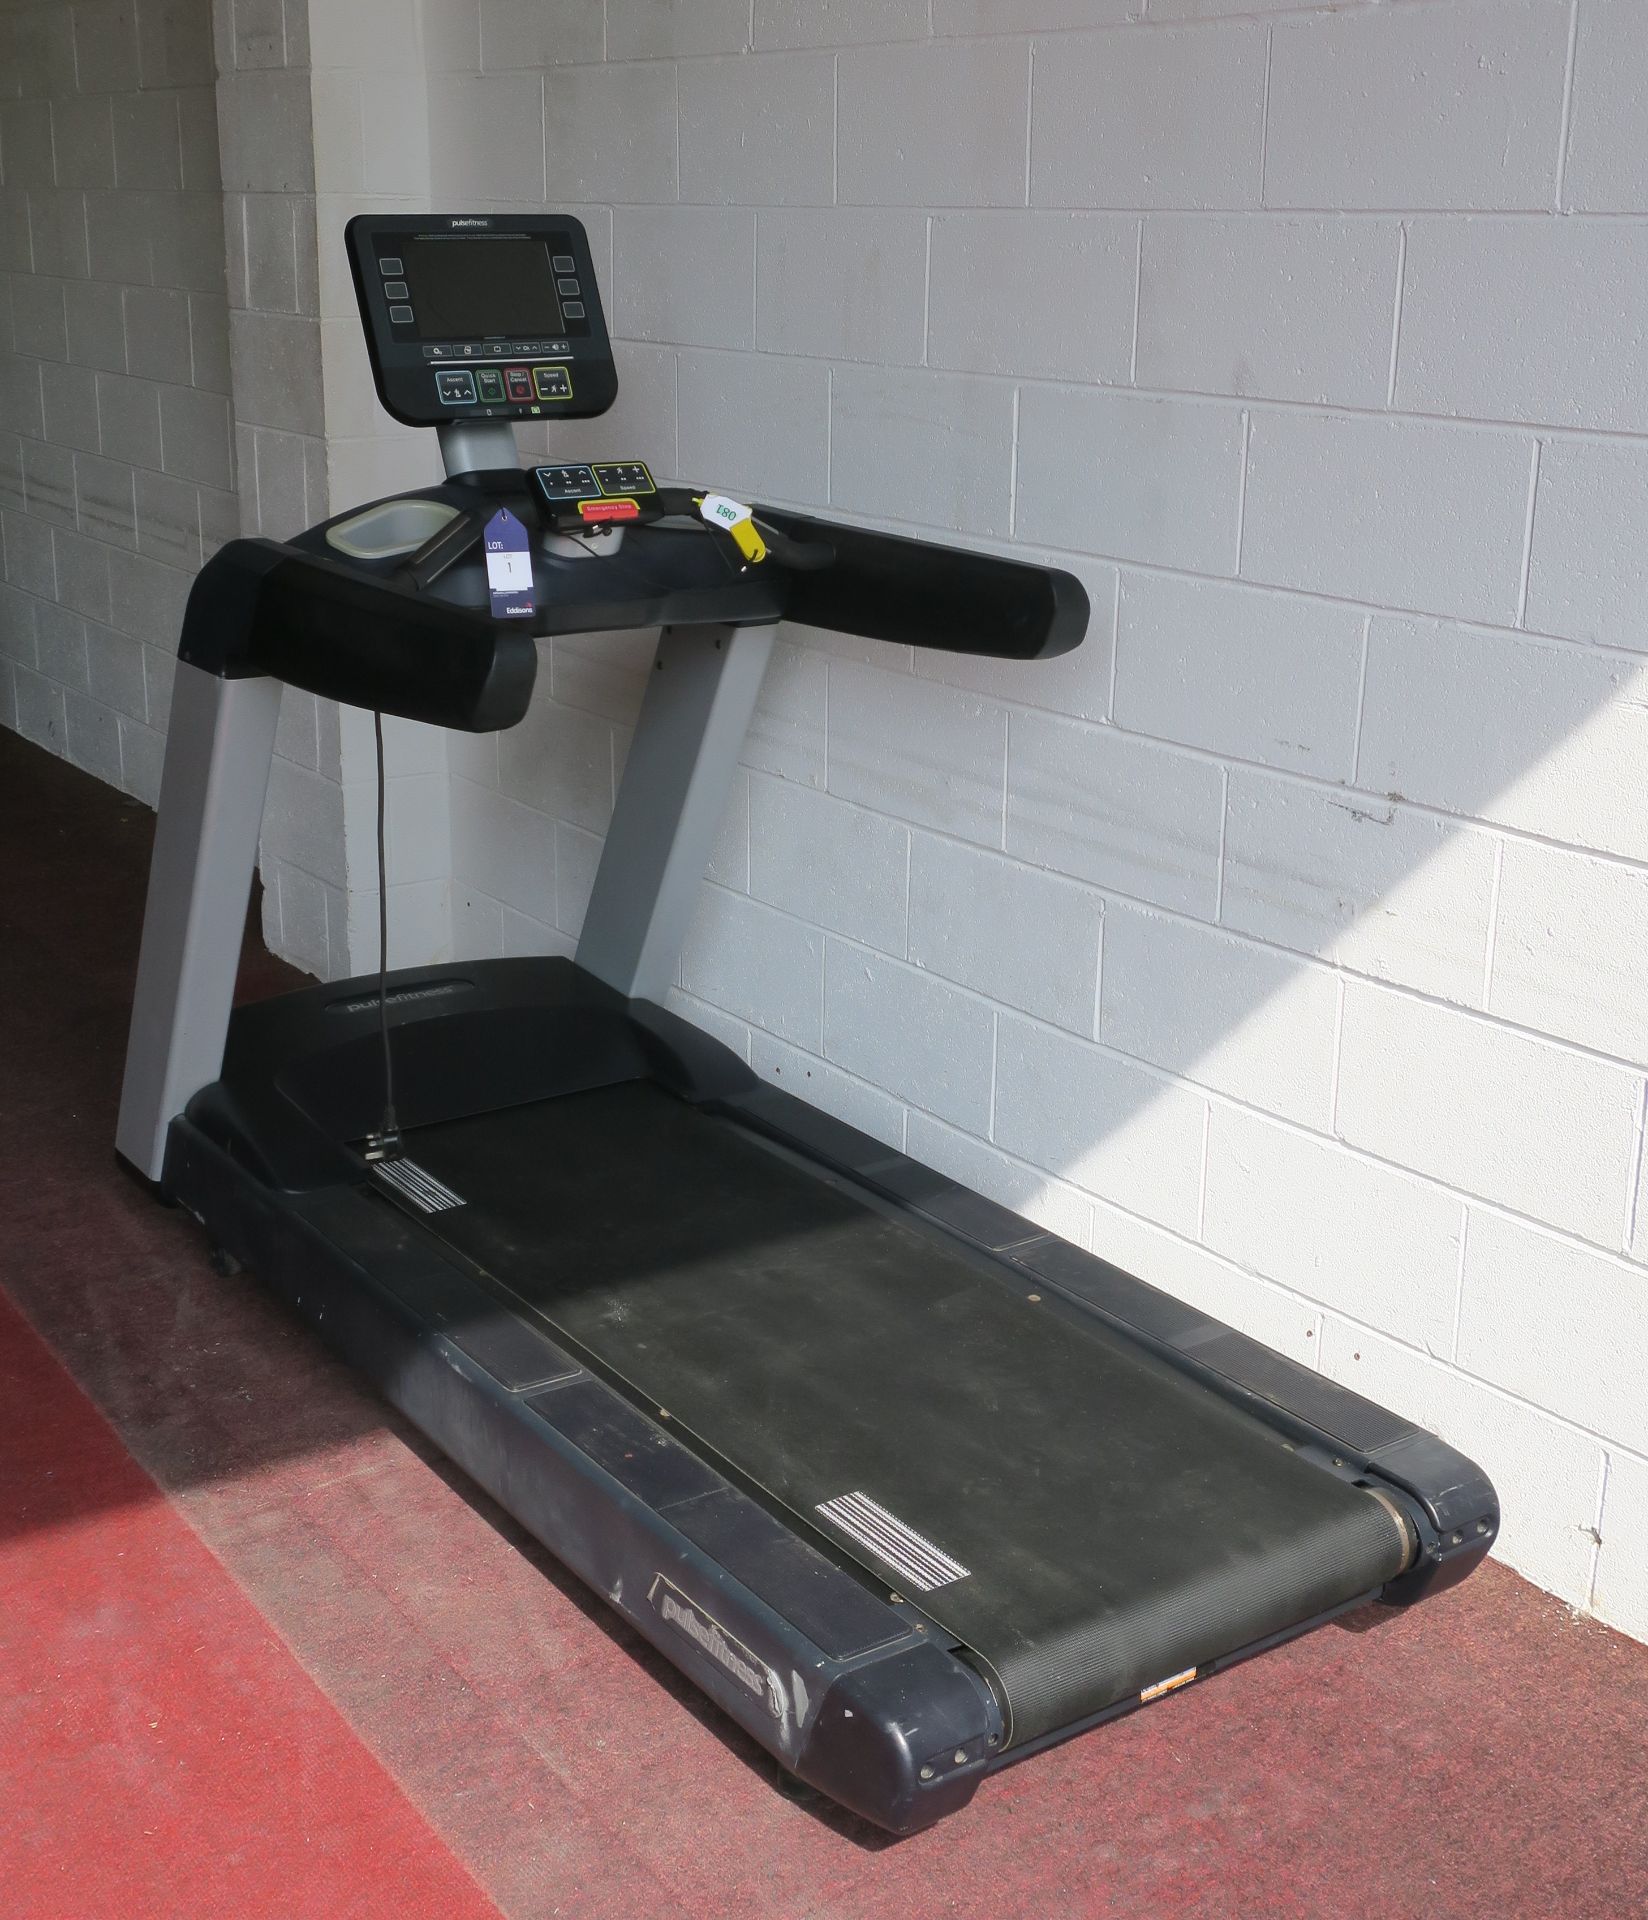 * A Pulse Fitness Model 260G Treadmill with interactive screen, heart rate monitors, cup holders, - Image 3 of 5